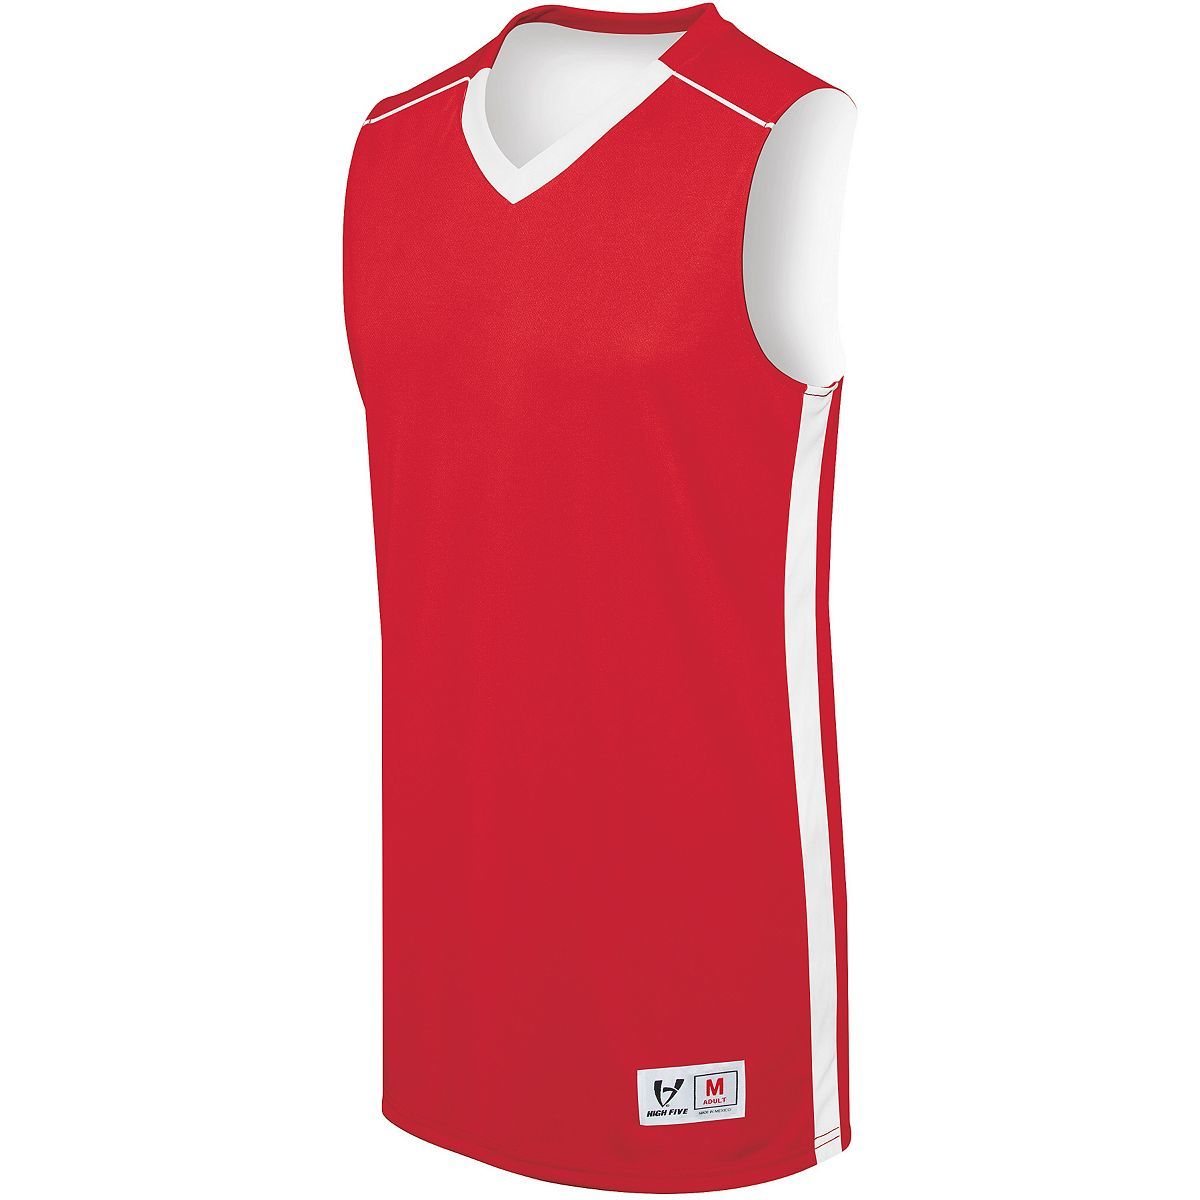 Augusta Sportswear Adult Competition Reversible Jersey in Scarlet/White  -Part of the Adult, Adult-Jersey, Augusta-Products, Basketball, Shirts, All-Sports, All-Sports-1 product lines at KanaleyCreations.com